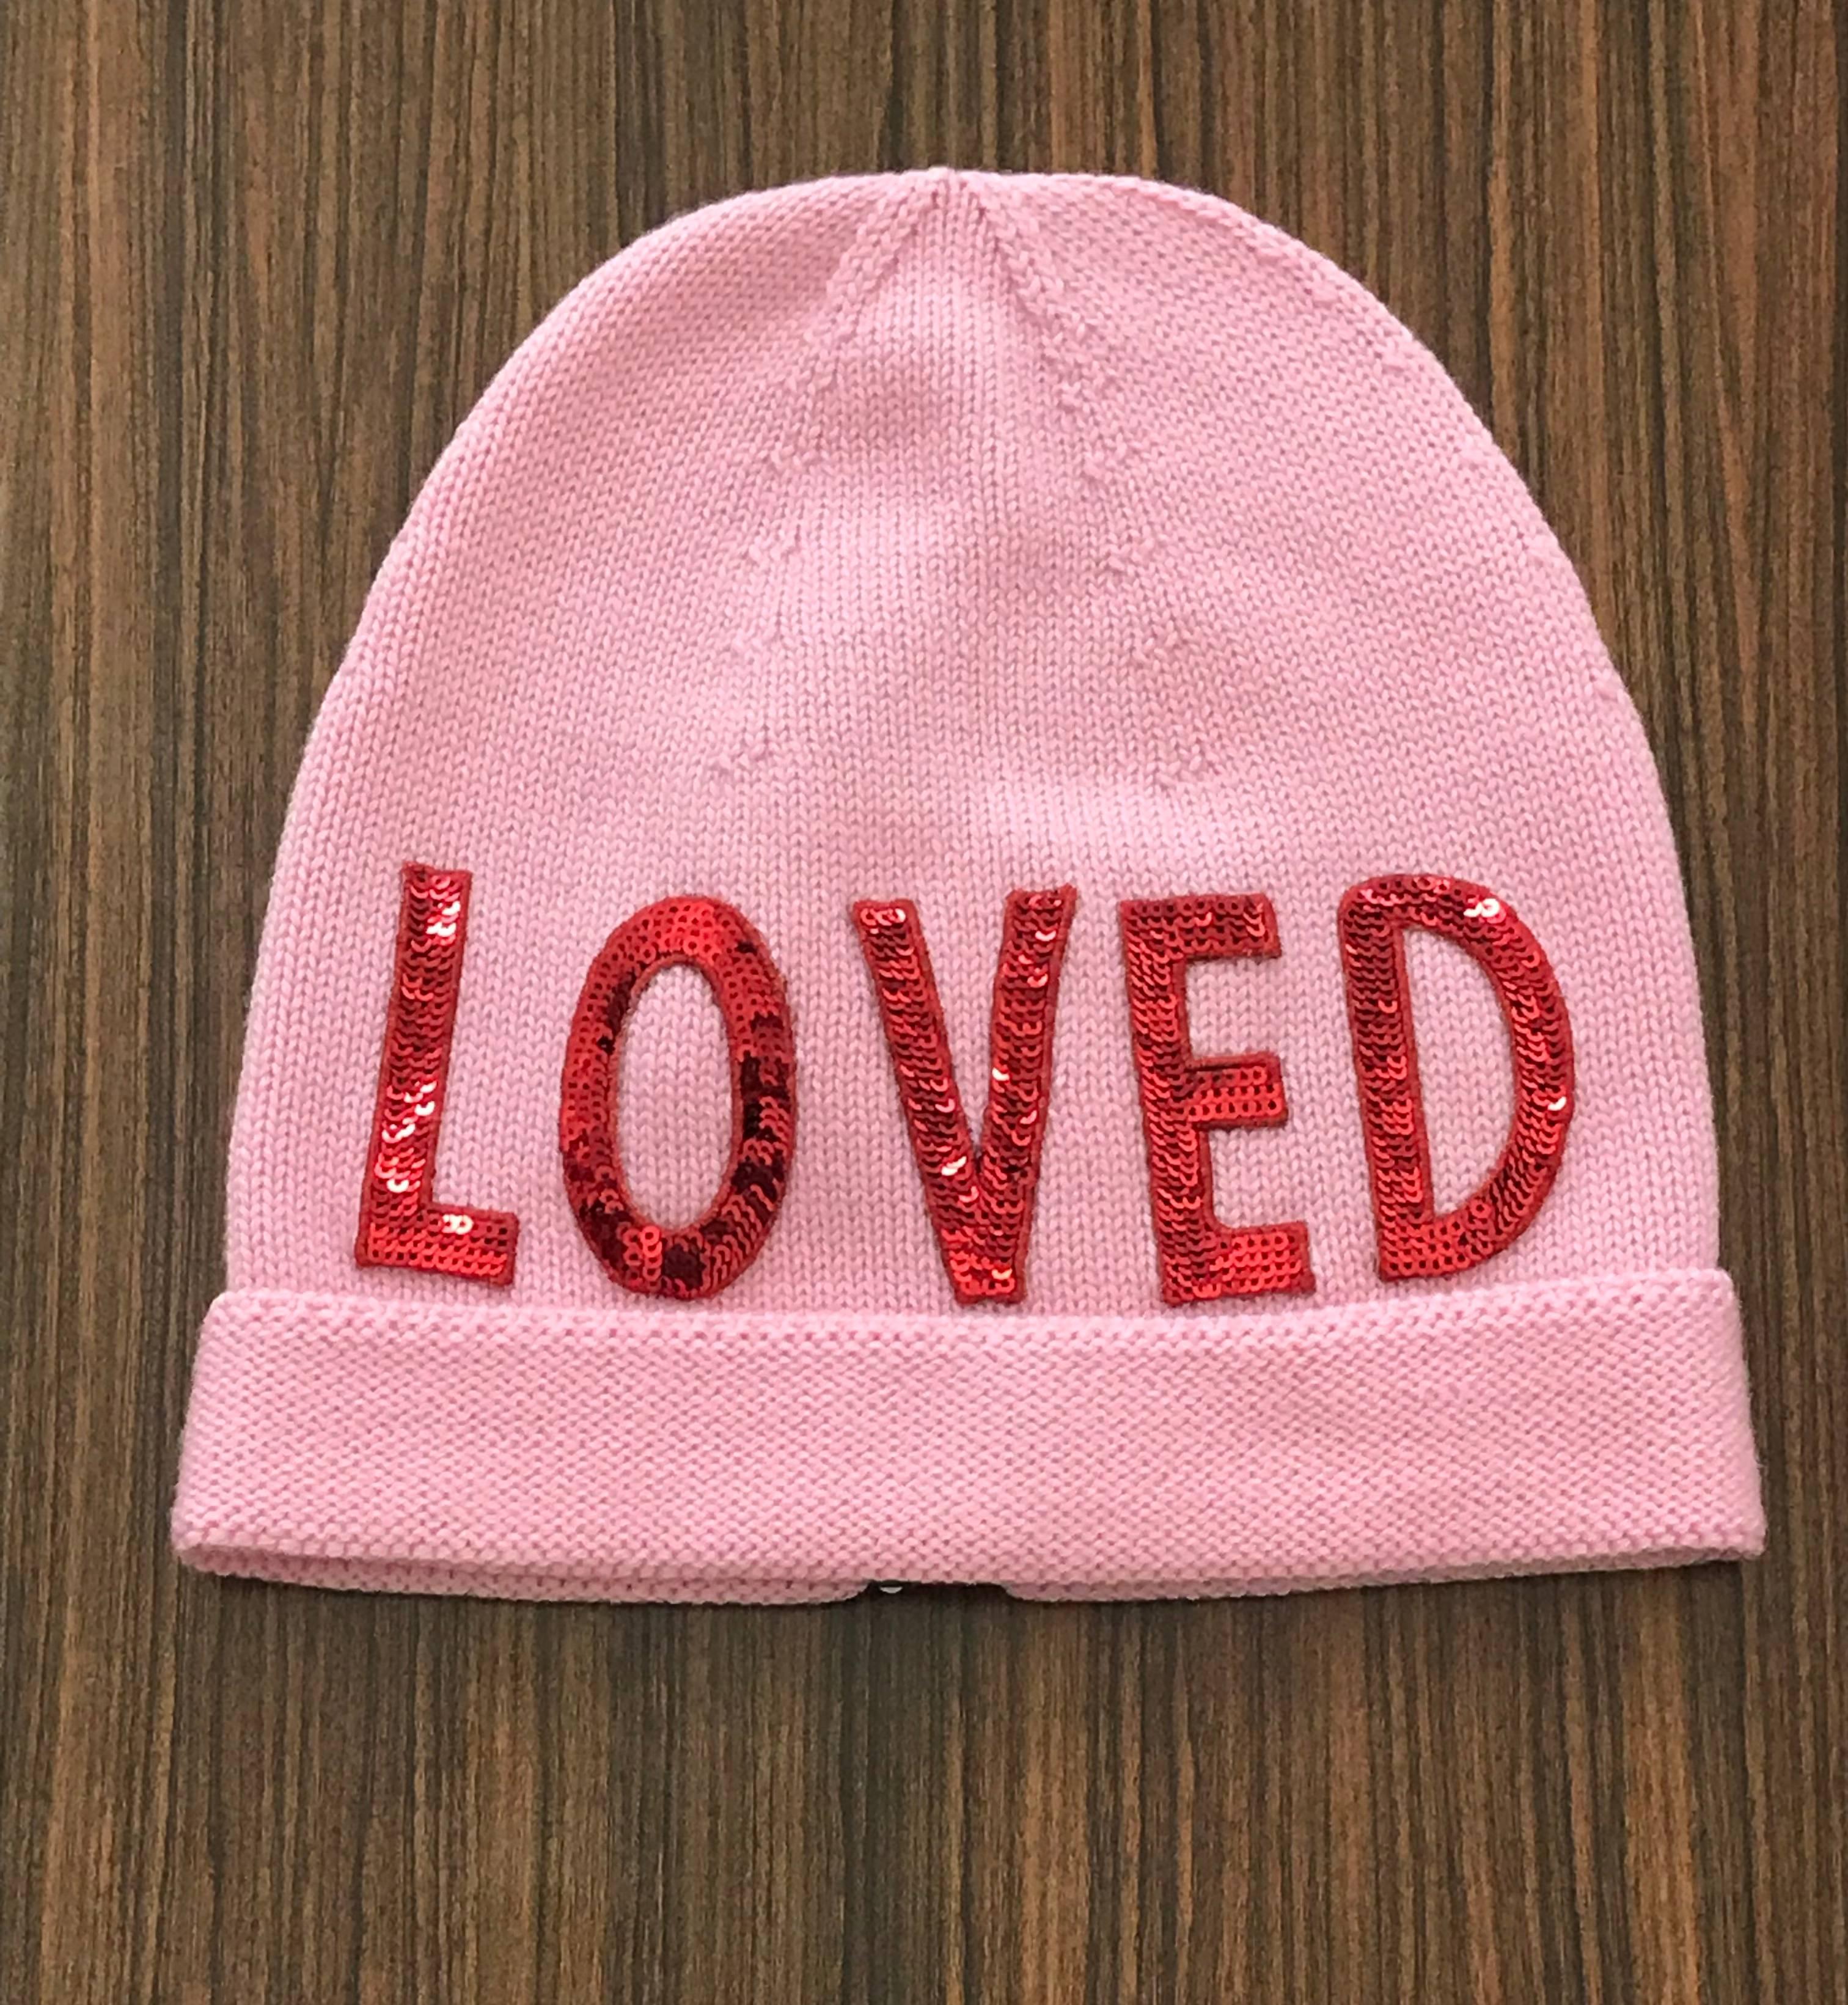 Gucci knit slouchy beanie hat in soft pink wool featuring red sequin loved graphic and Gucci's signature red and green stripe on ribbon at back. In stores now. 

100% wool. 
Loved patch is 100% polyester.

Size S. 

Excellent condition, unworn with